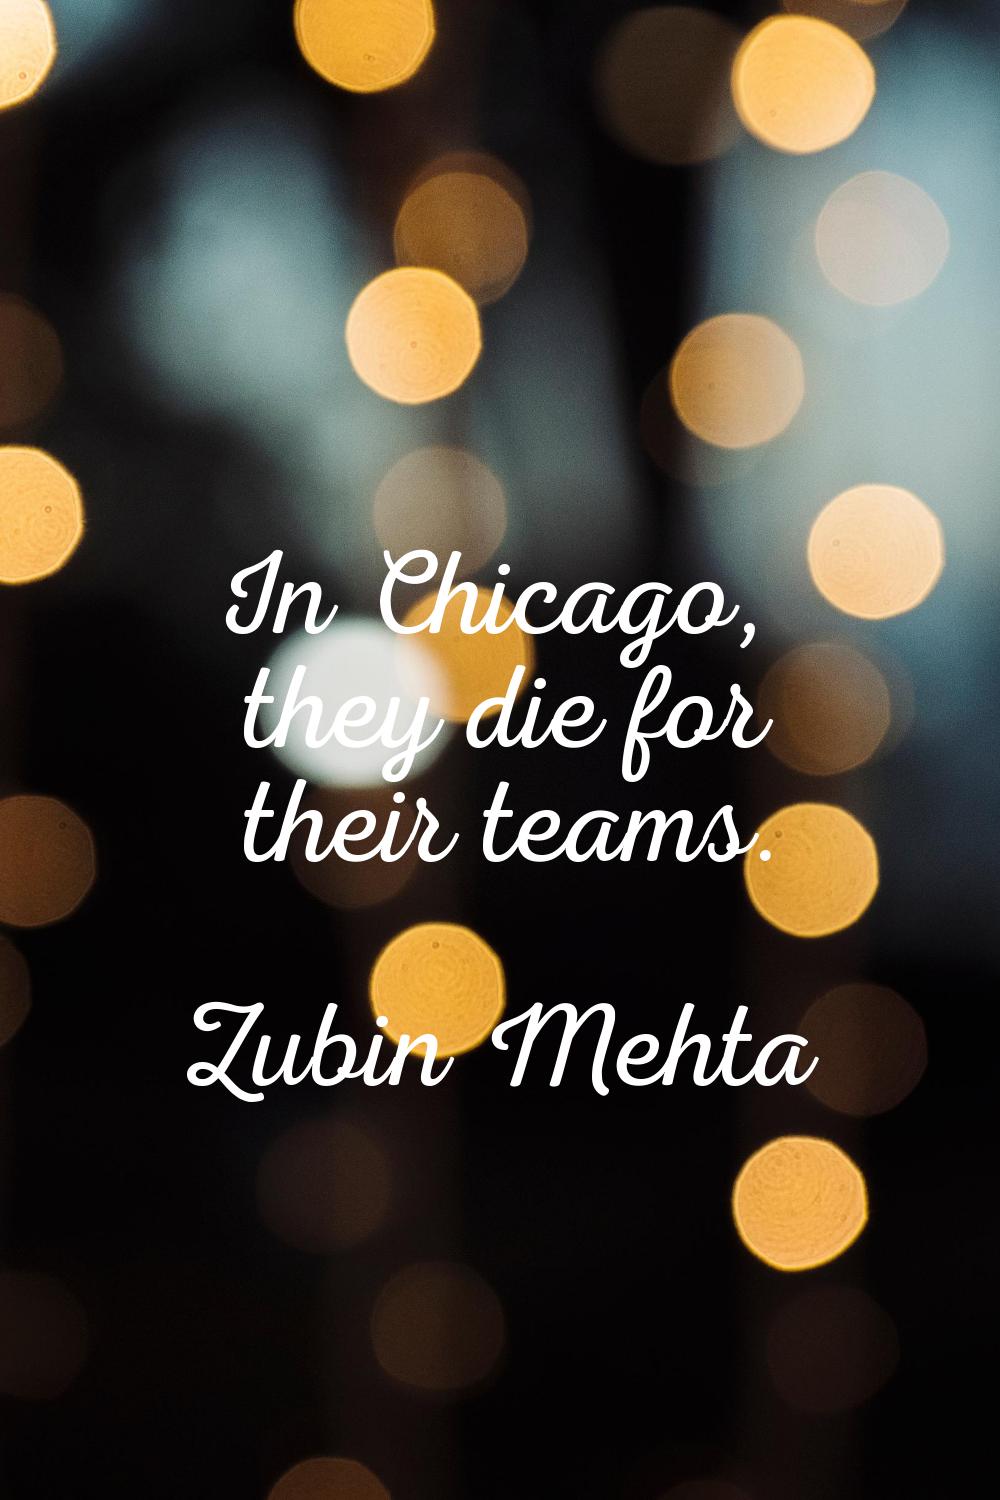 In Chicago, they die for their teams.